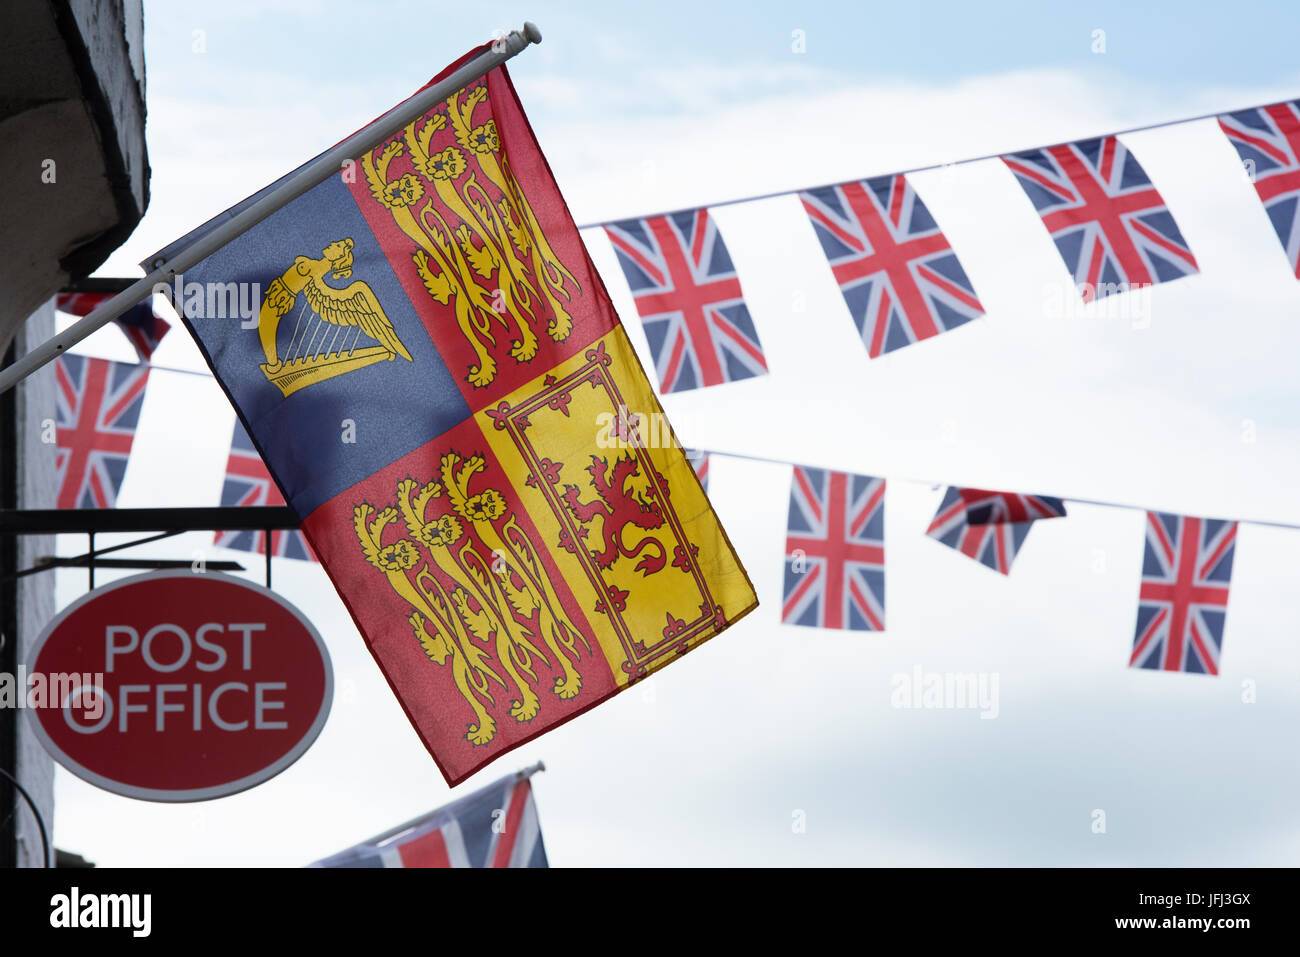 The Royal Standard, Union jack bunting and post office sign in Upton-upon-Severn, Worcestershire, England Stock Photo